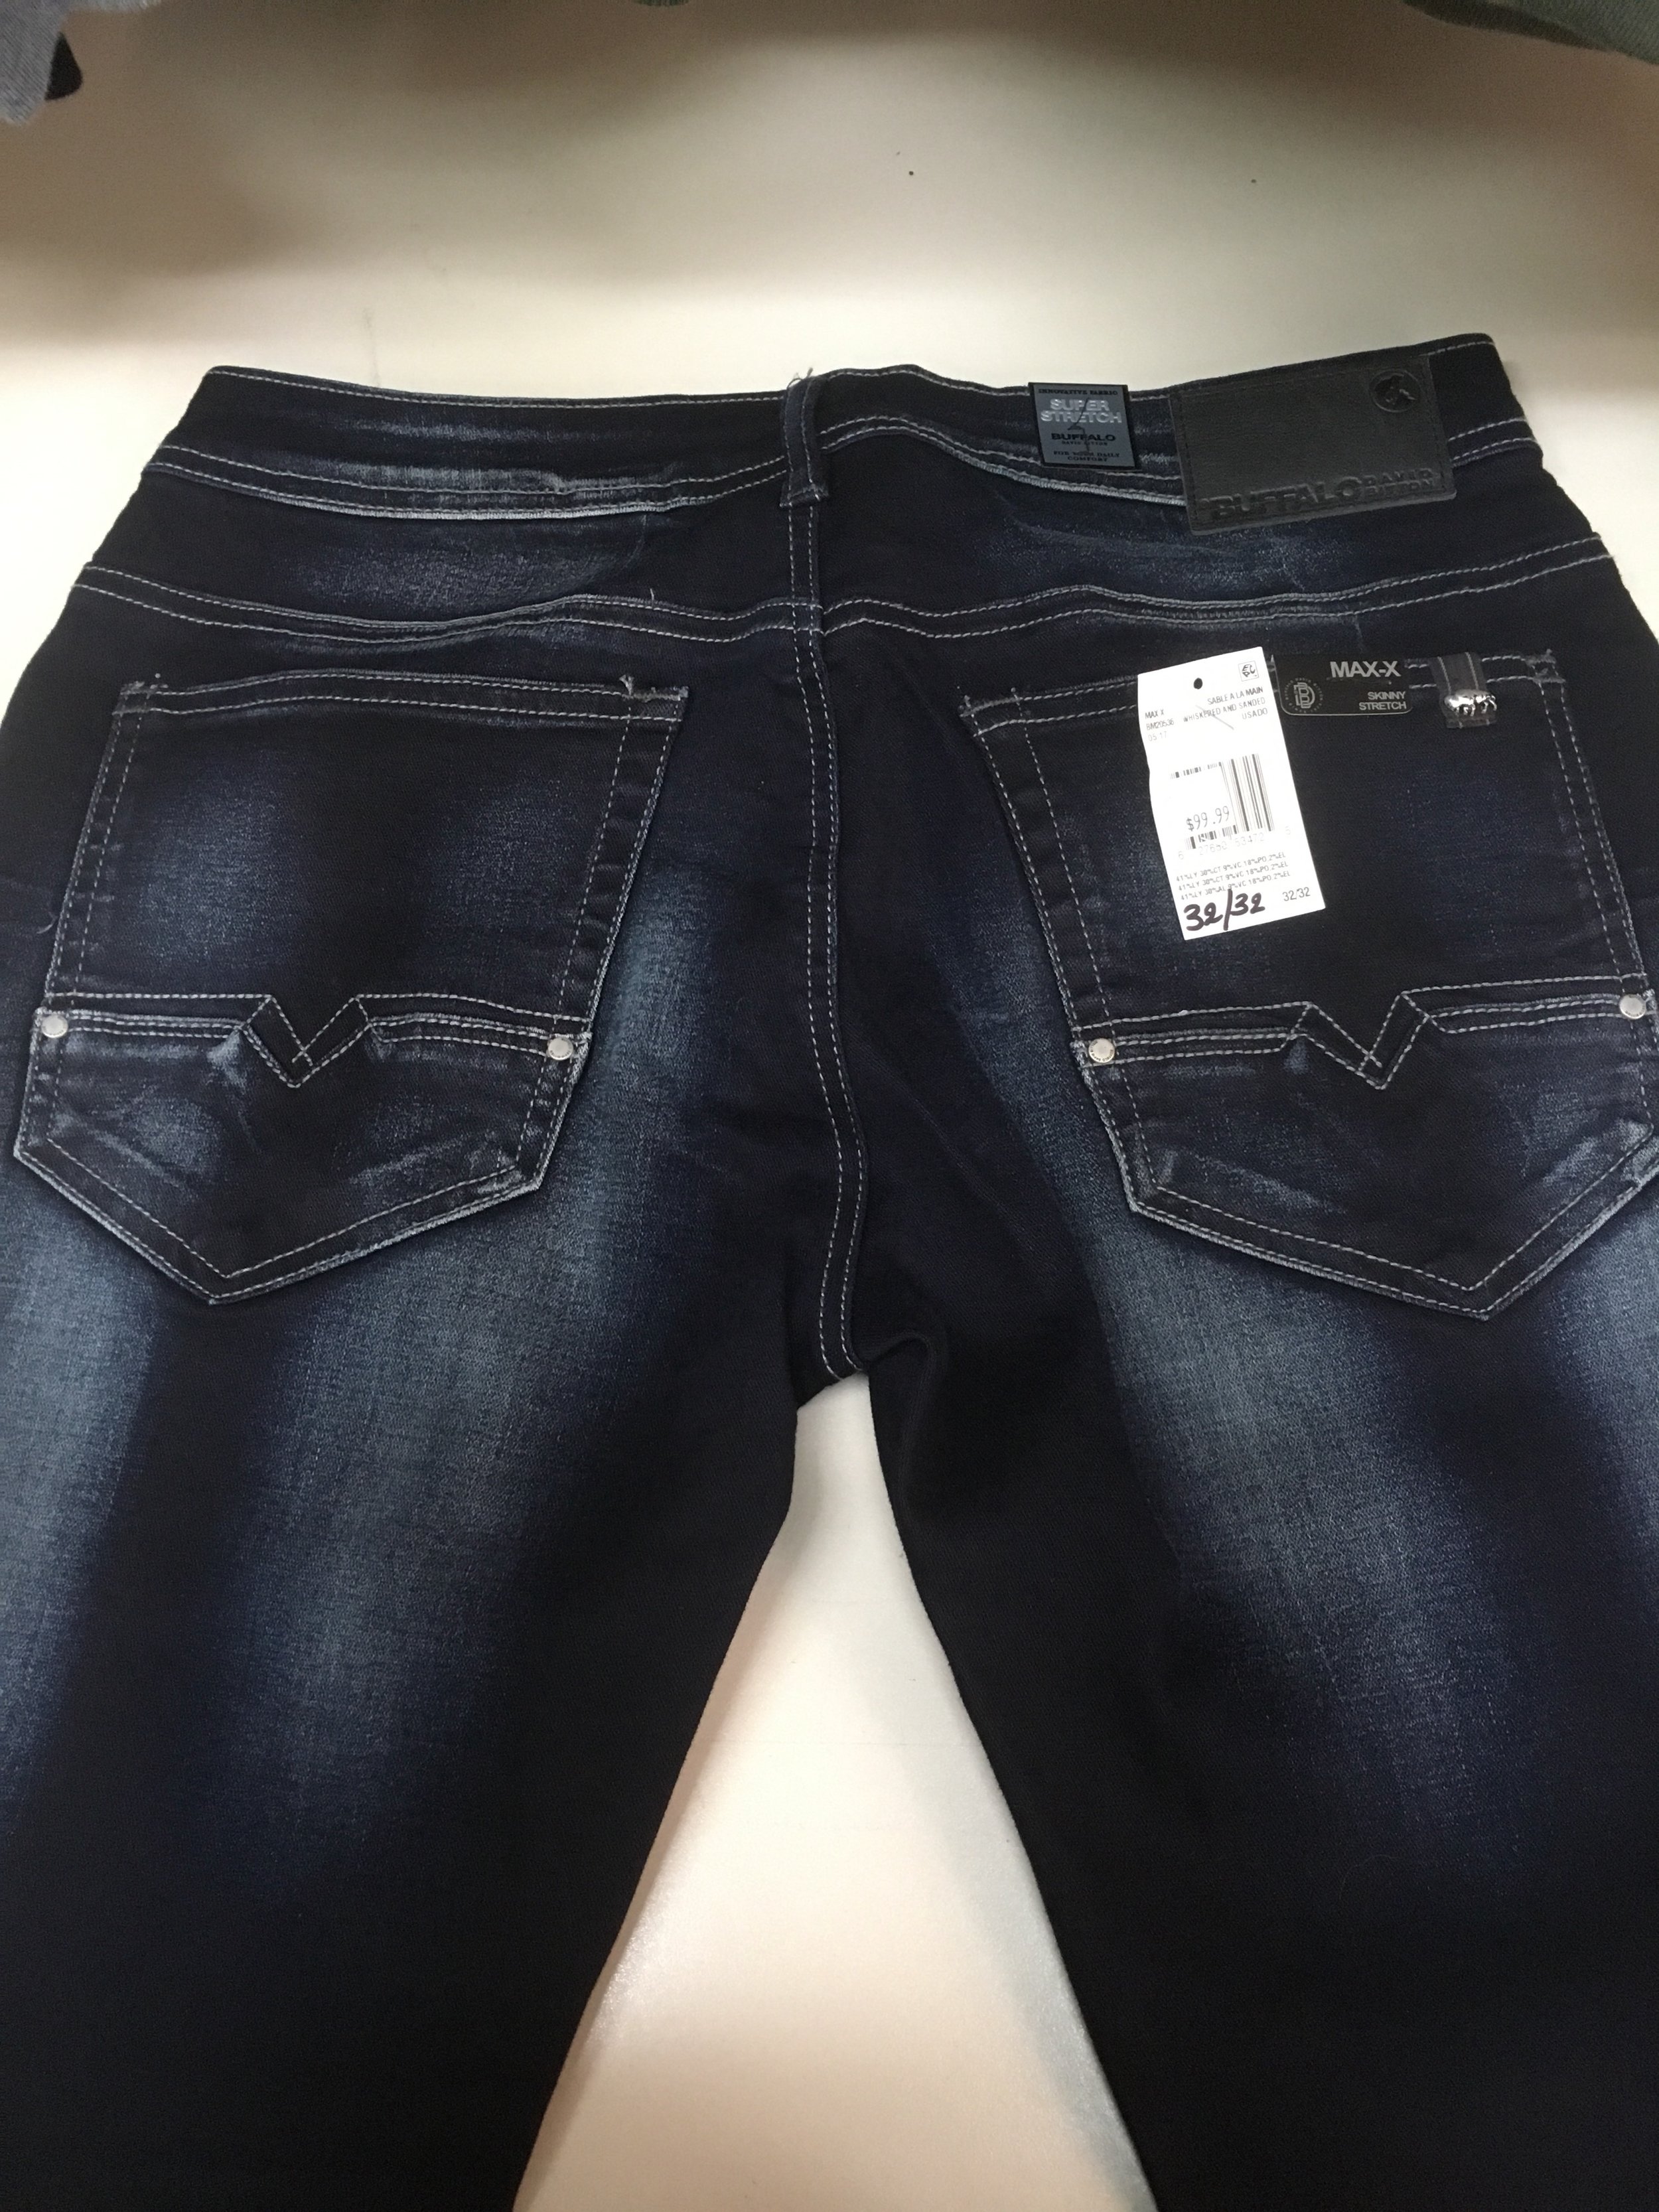 Sargent Blue Jeans - Buffalo MAX-X™ - Skinny